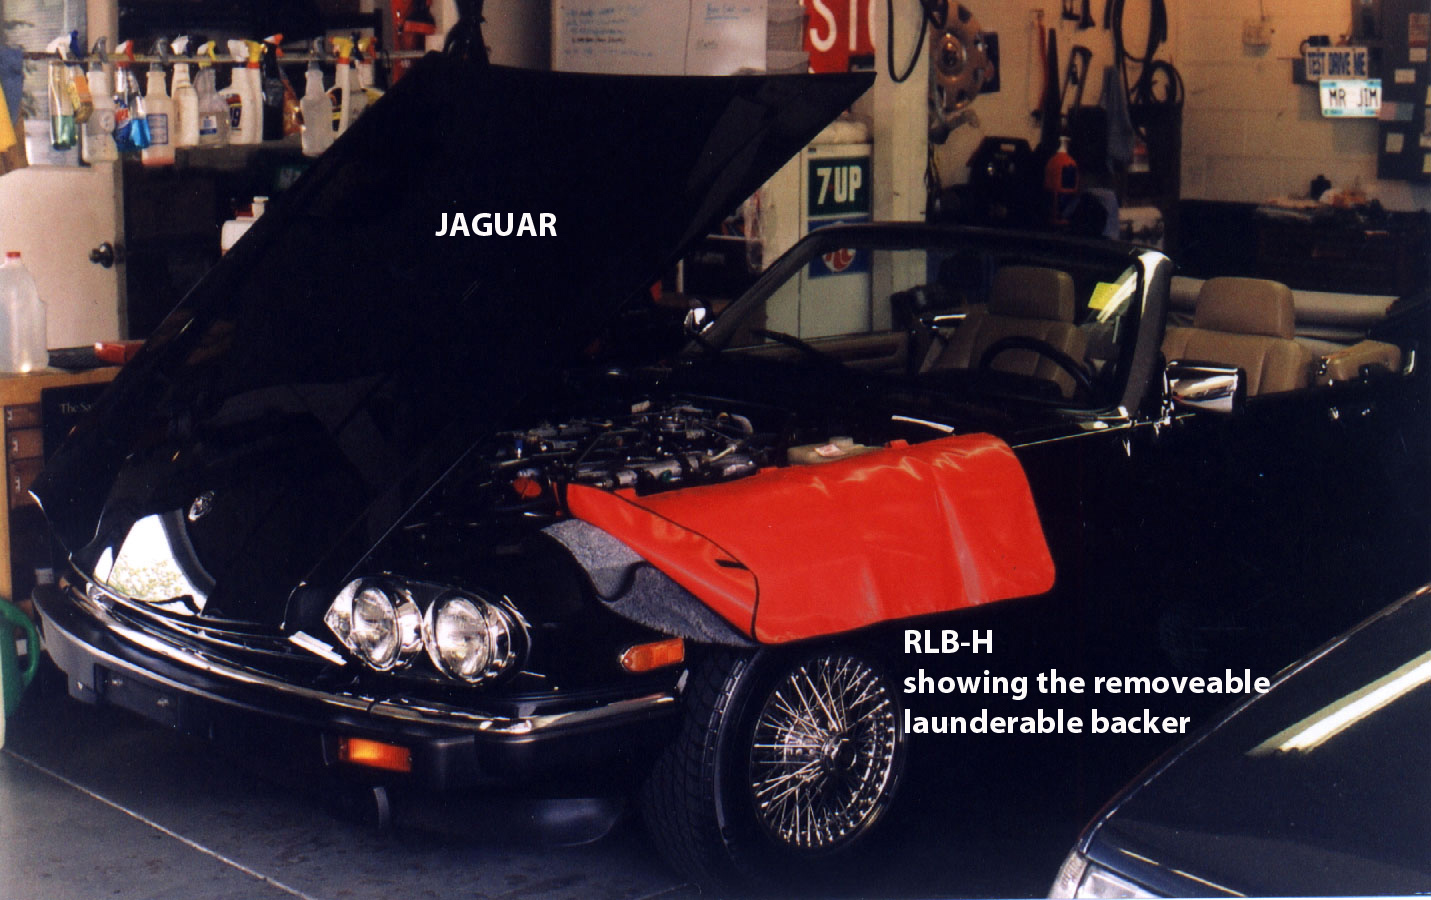 Jaguar with Netcore RLB-H fender cover